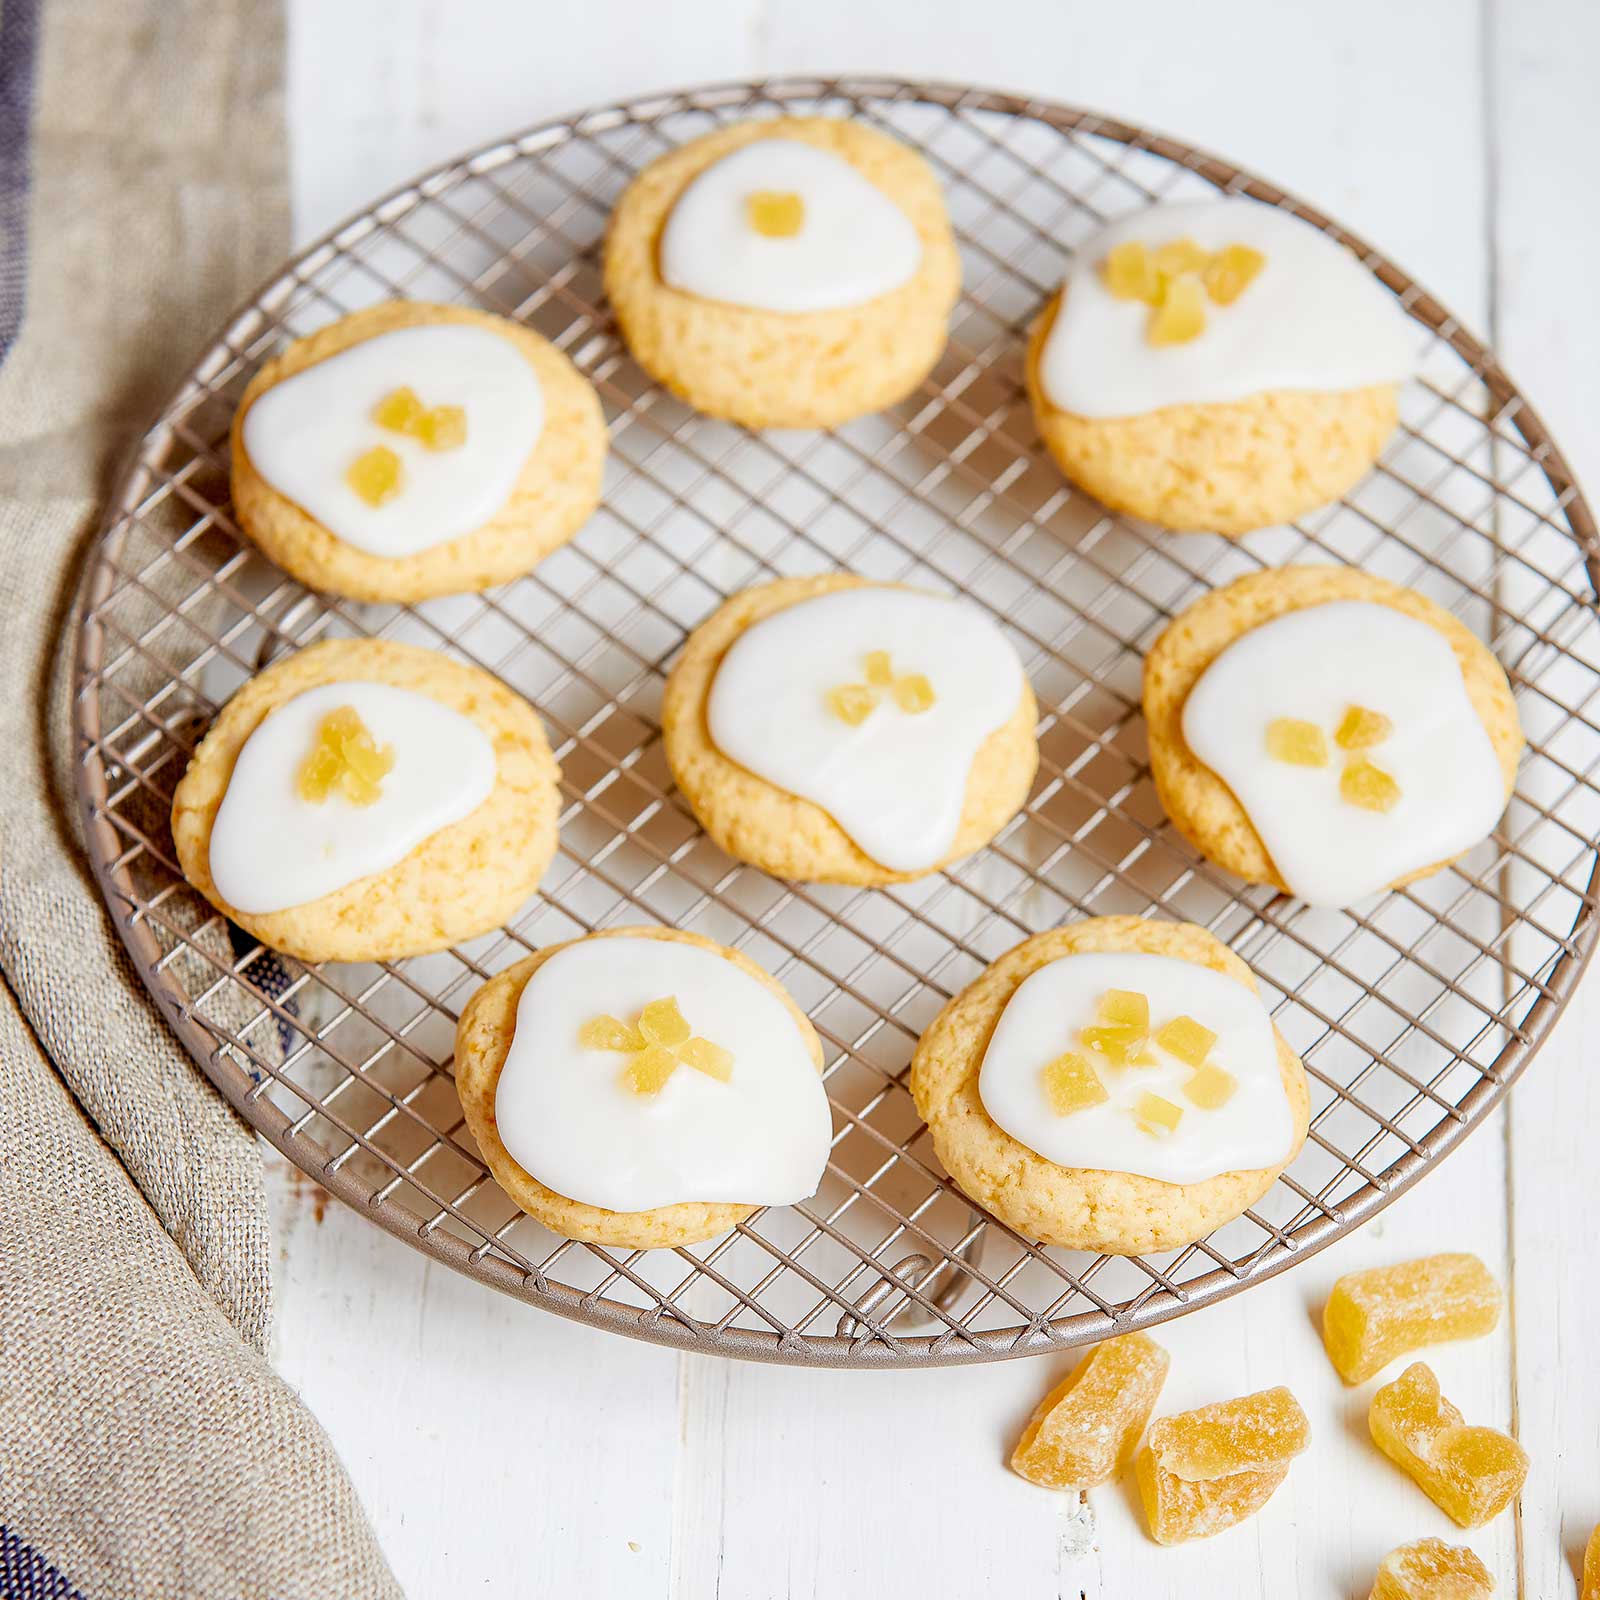 Gluten-free vegan ginger marmalade biscuits are arranged on a round wire cooling tray. A few pieces of crystalised ginger have been sprinkled in front of the tray. The biscuits are round with a white icing and are topped with a few small pieces of crystalised ginger.